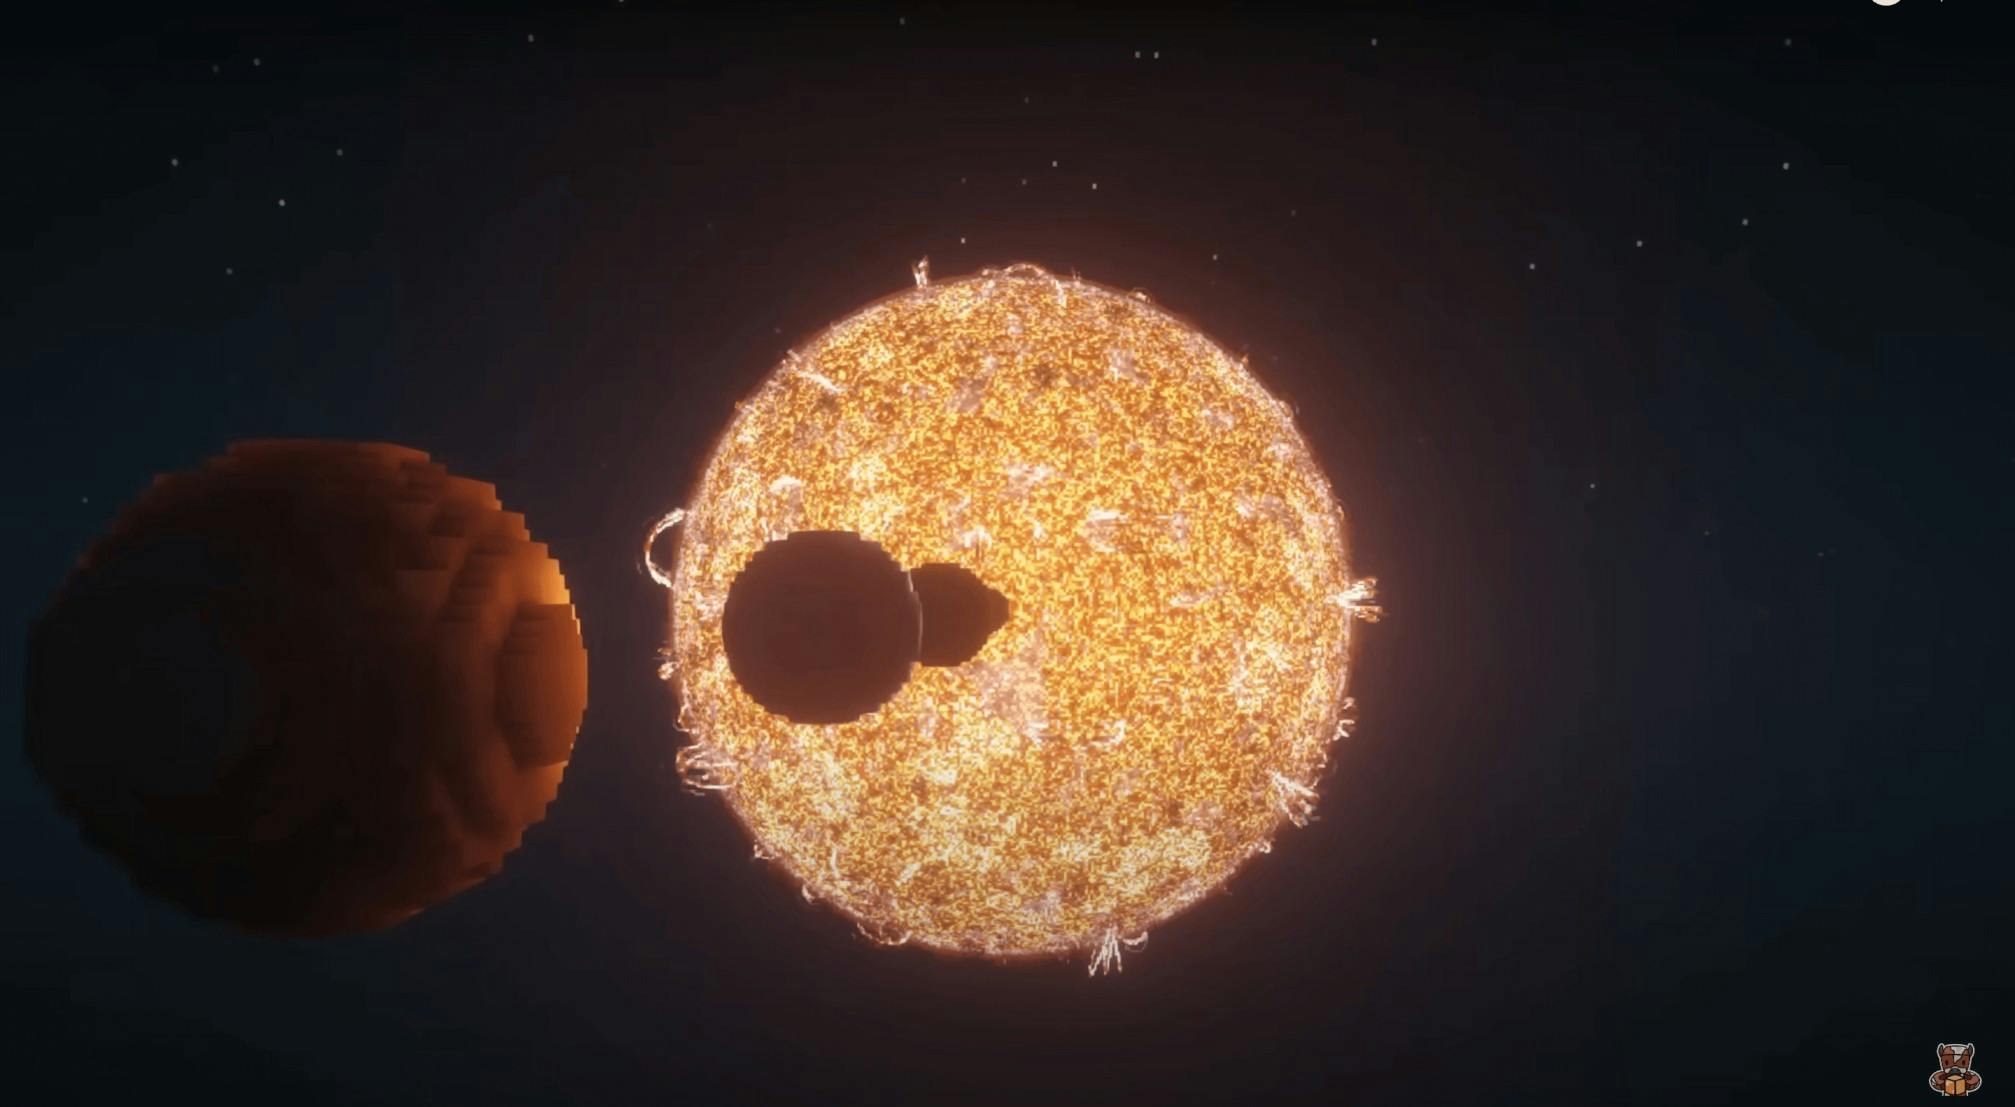 Teenager Recreates Entire Known Universe in Minecraft